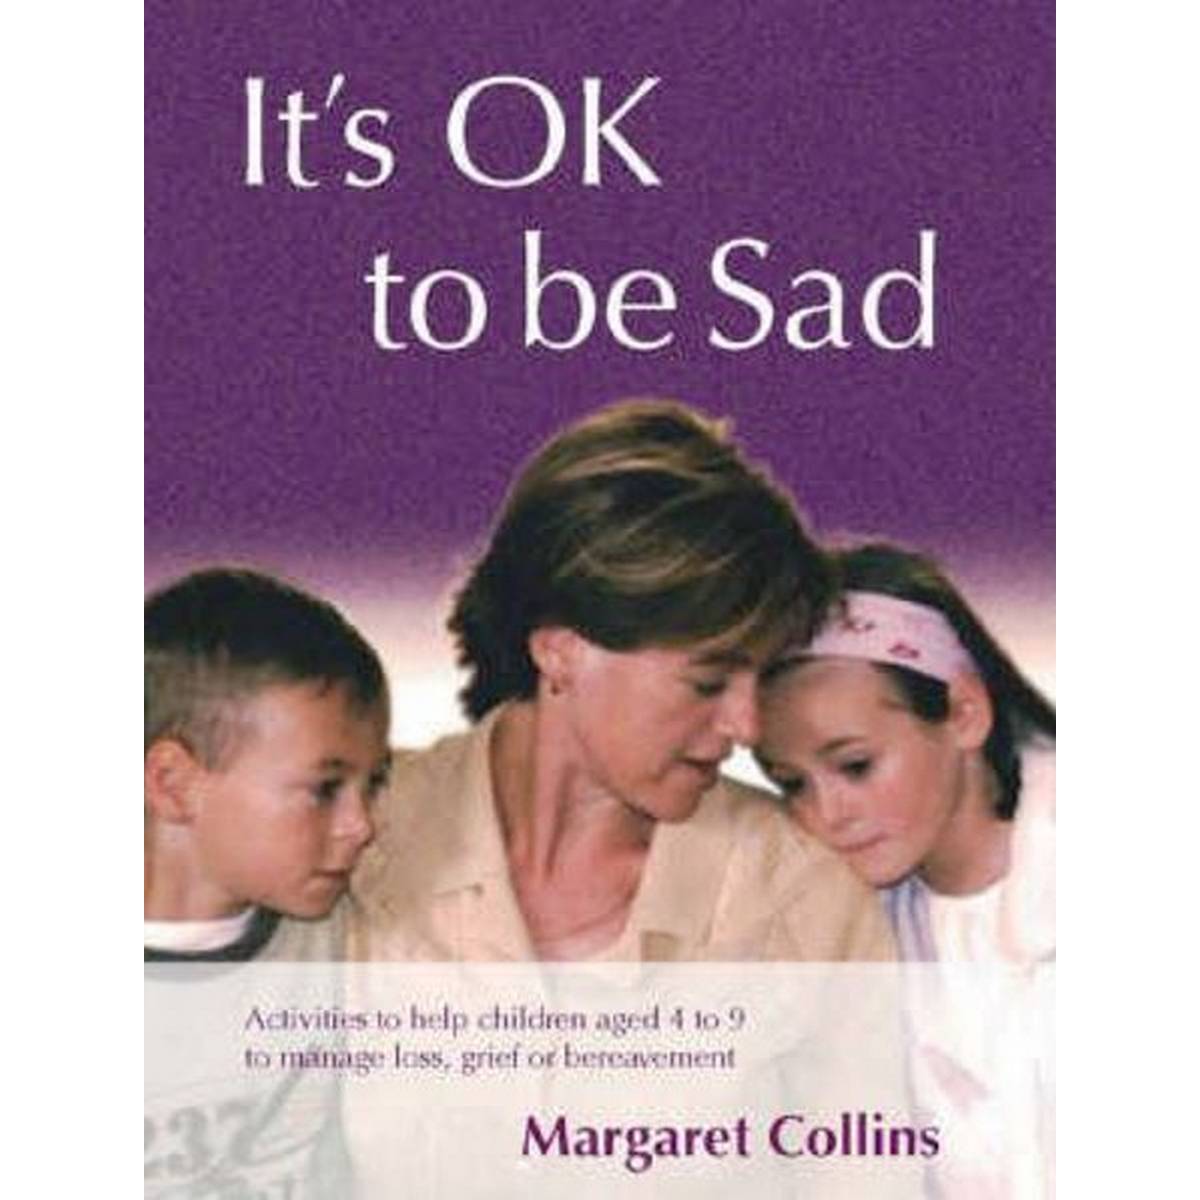 It's OK to Be Sad: Activities to Help Children Aged 4-9 to Manage Loss, Grief or Bereavement